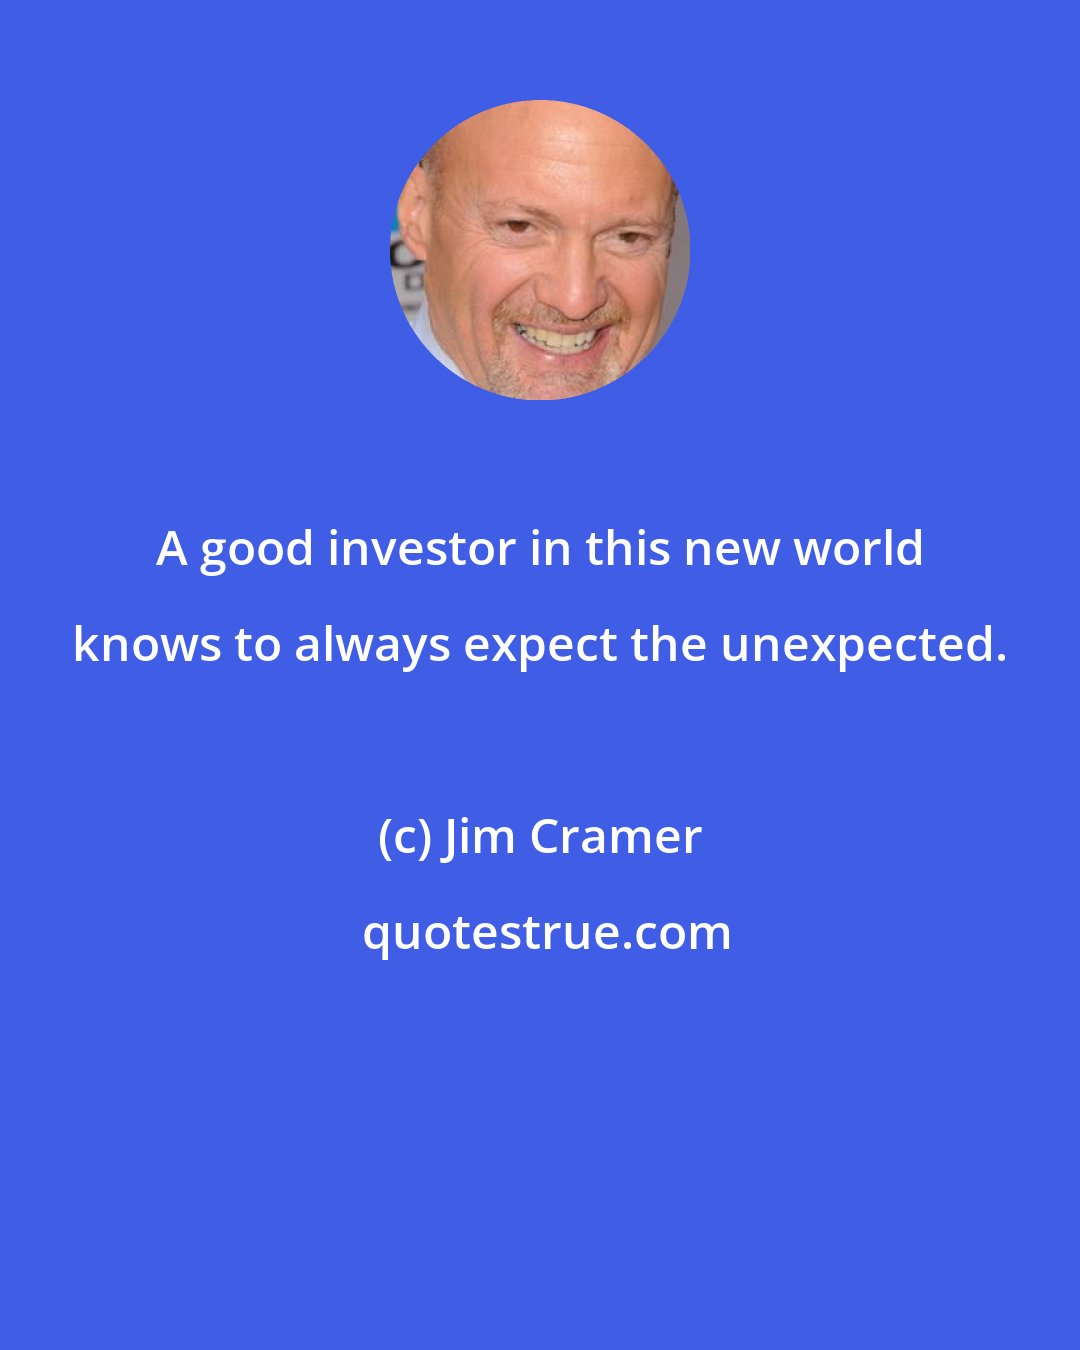 Jim Cramer: A good investor in this new world knows to always expect the unexpected.